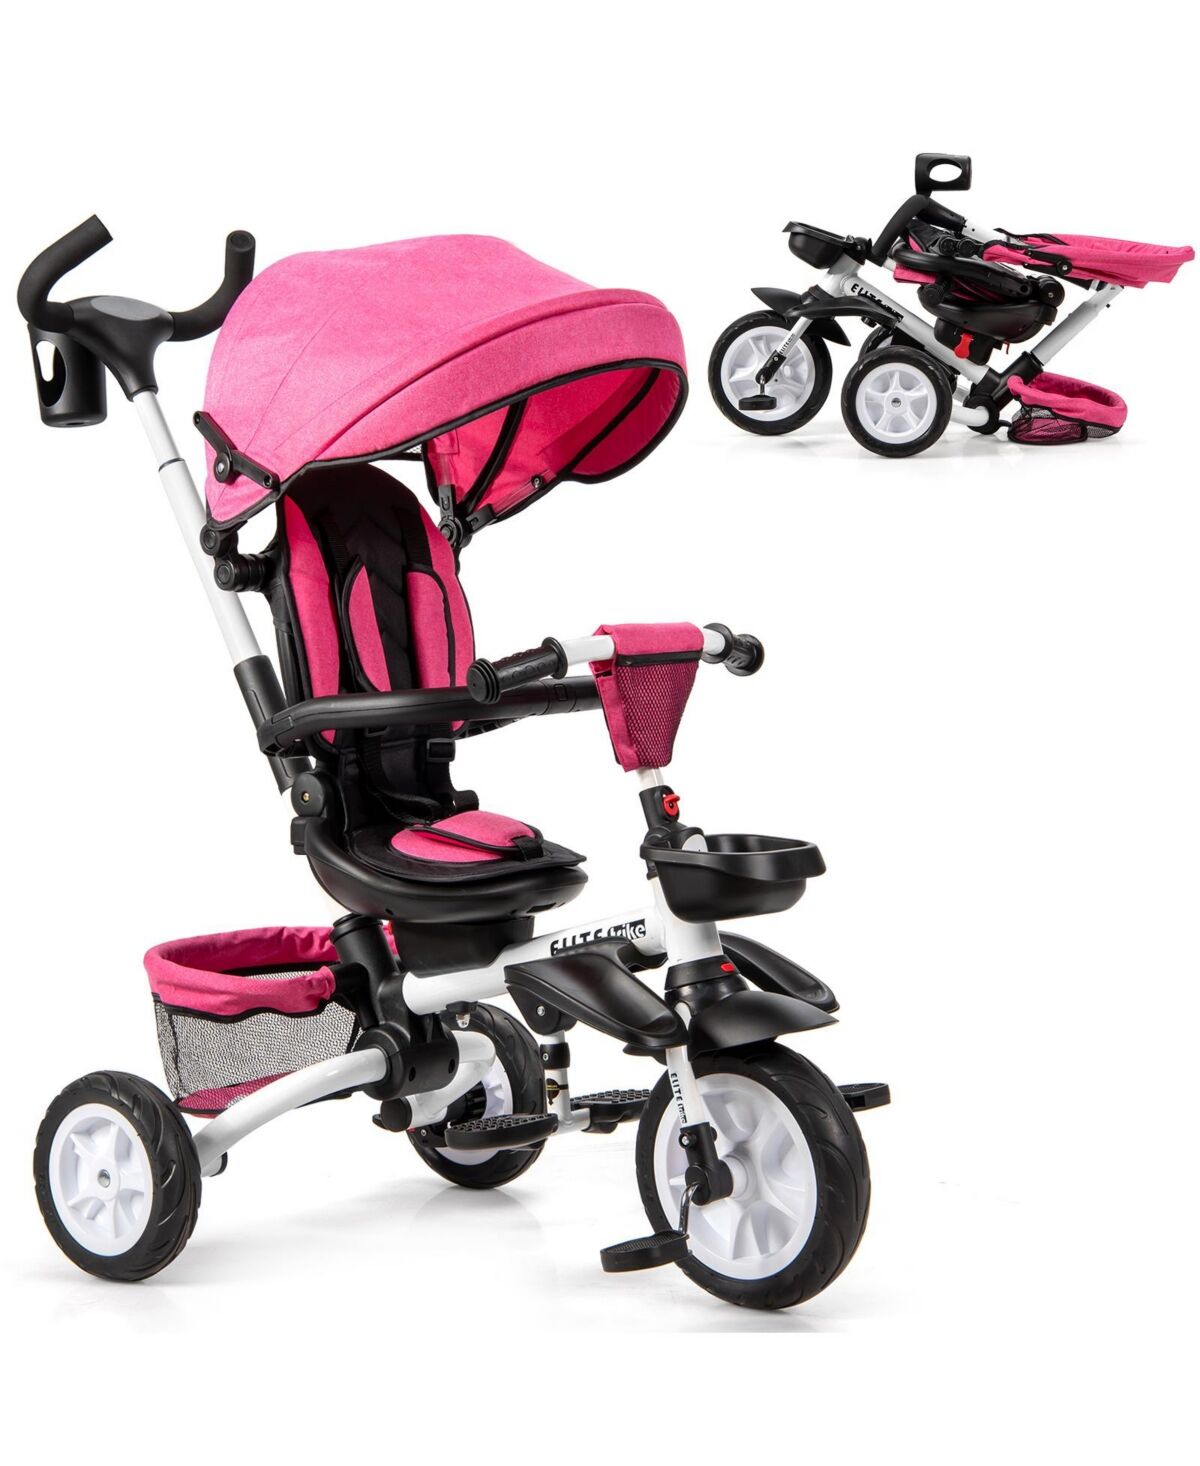 Costway 6-In-1 Kids Baby Stroller Tricycle Detachable Learning Toy Bike w/ Canopy - Pink